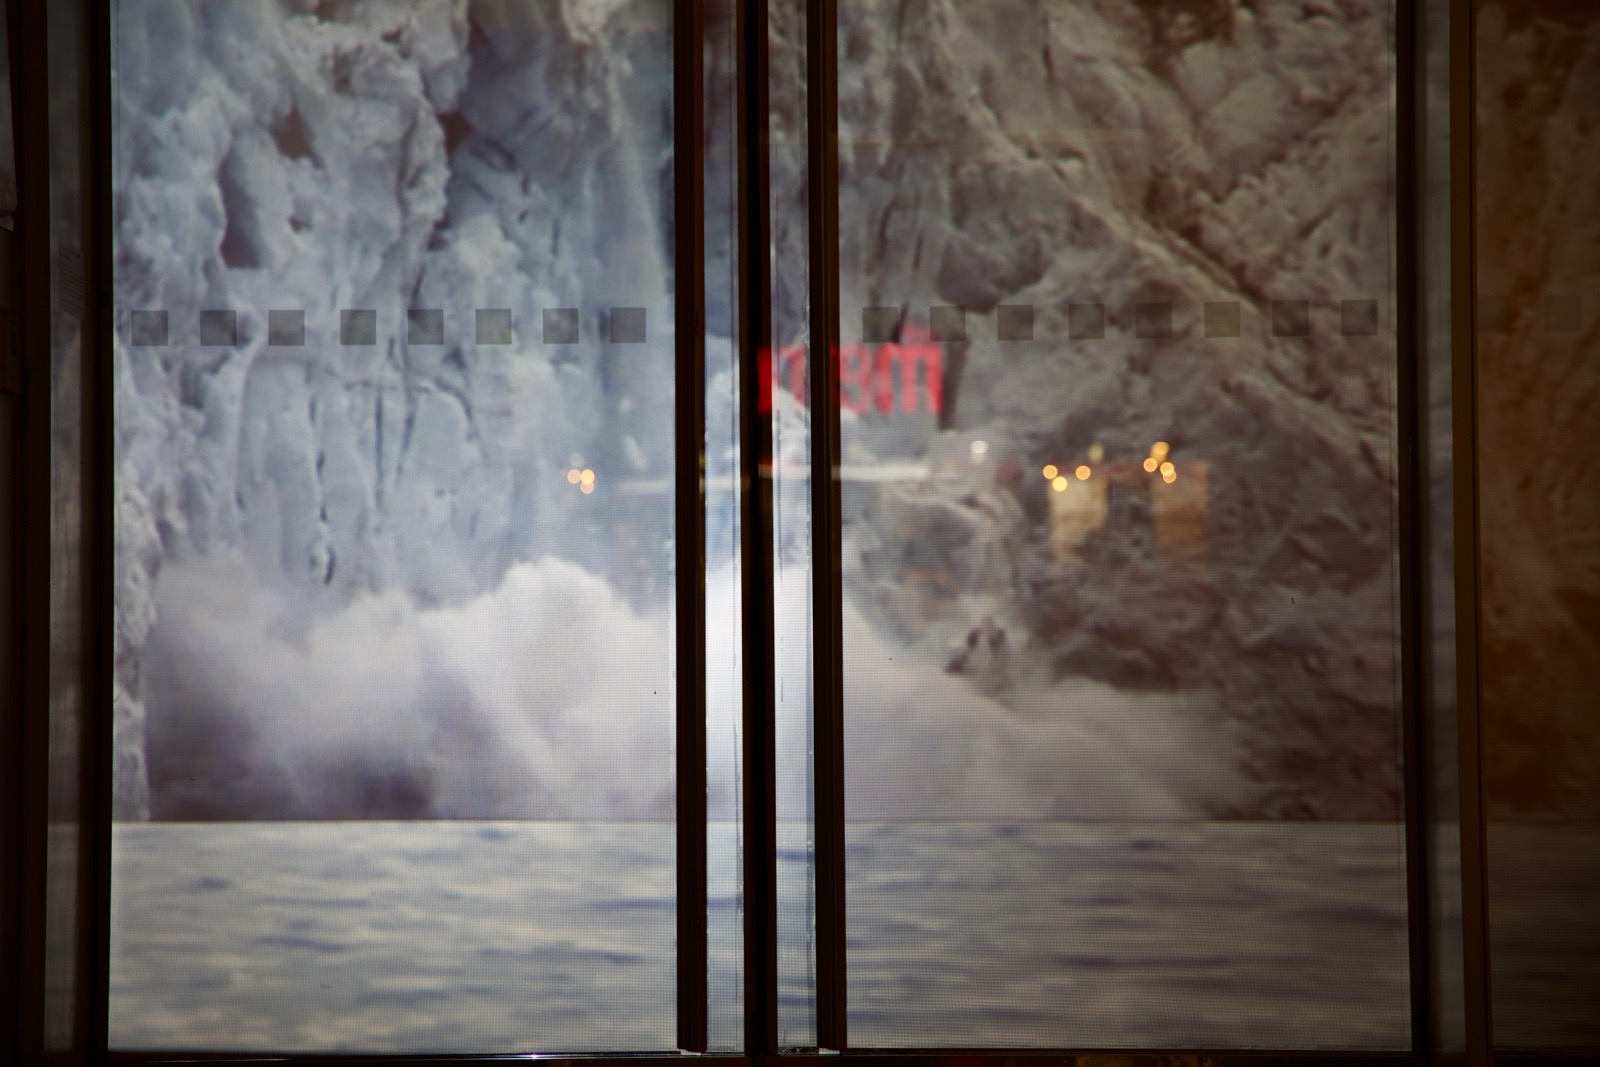 Closeup of the buiding's storefront windows showing a projected image of a large glacier collapsing into a body of water. The image is pixellated since it is so close-up.